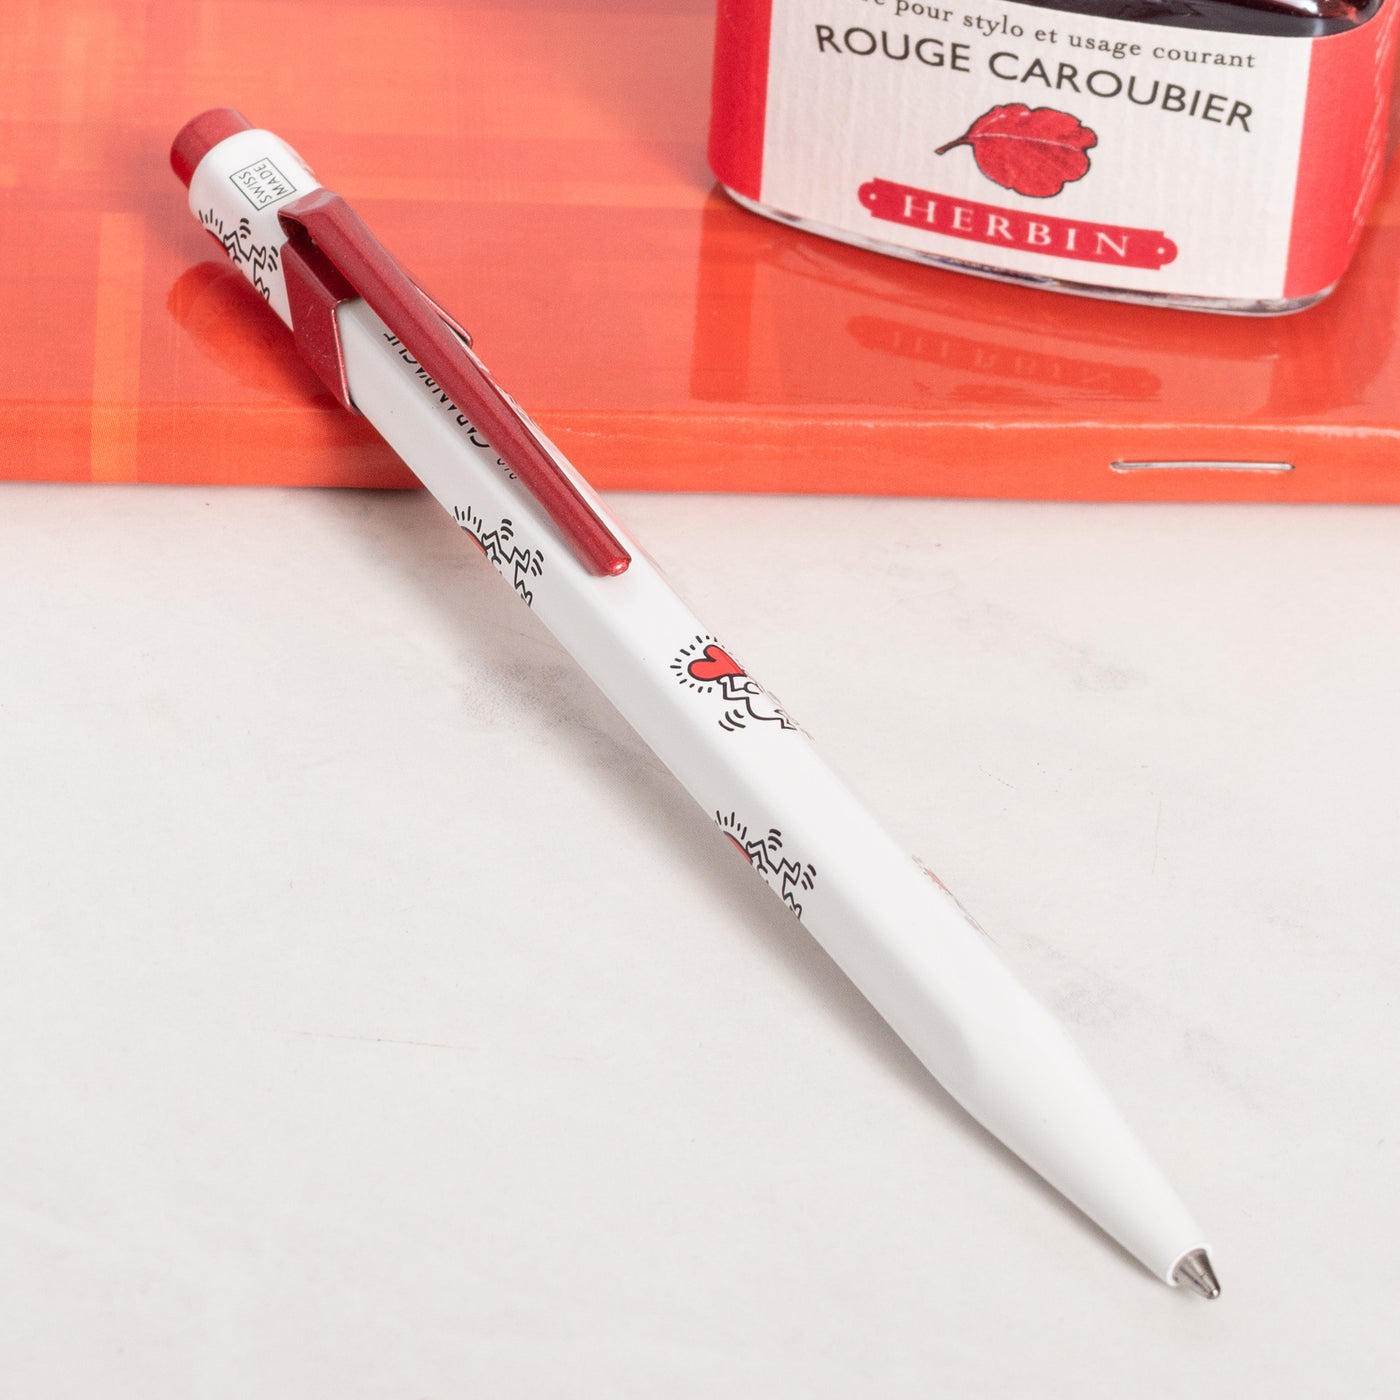 Caran d'Ache 849 Special Edition Keith Haring White Ballpoint Pen red